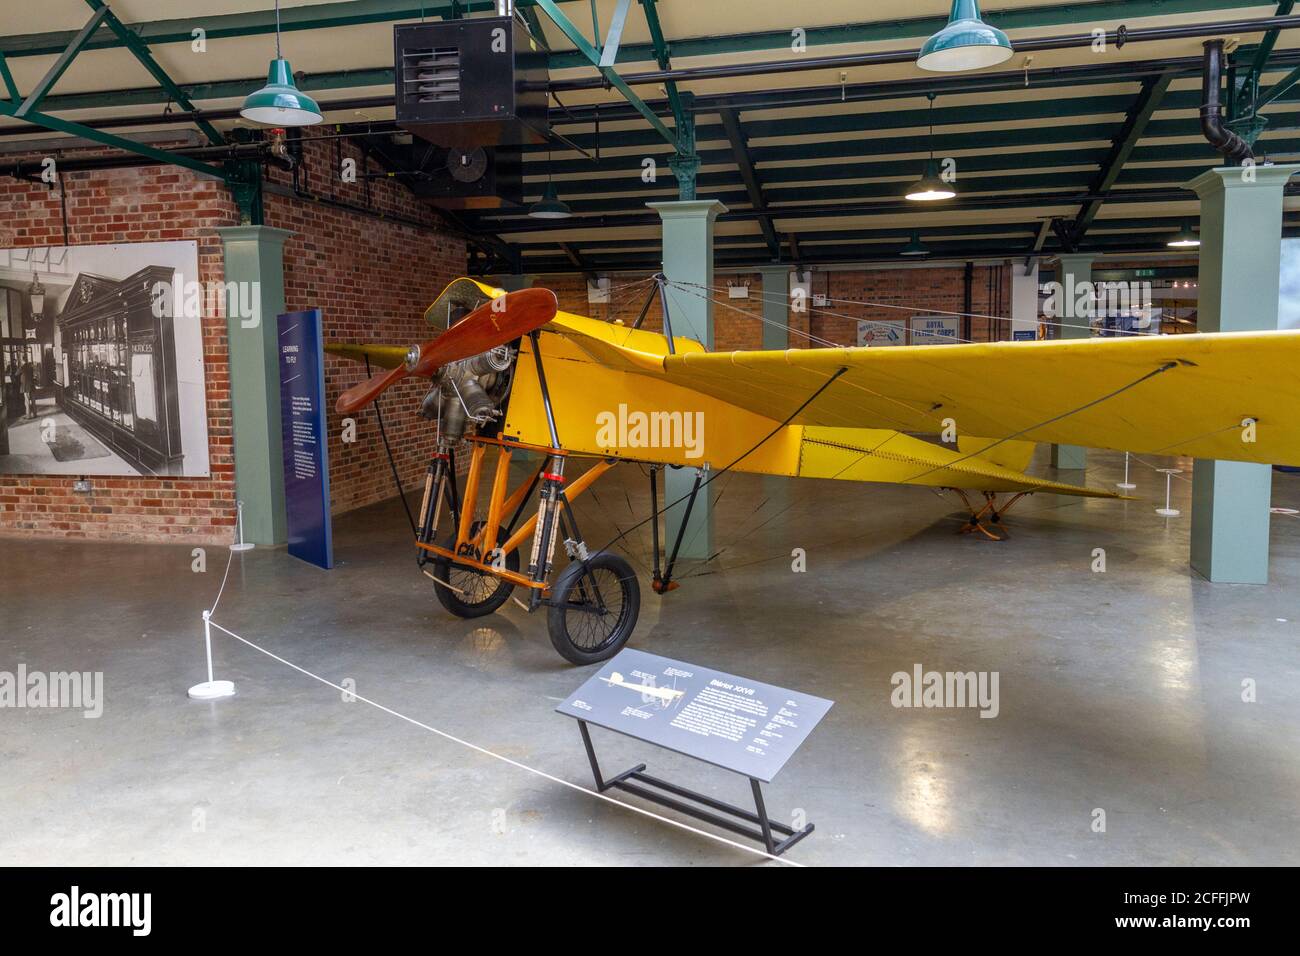 A Blériot XXVII monoplane (1911) on display in the RAF Museum, London, UK. Stock Photo